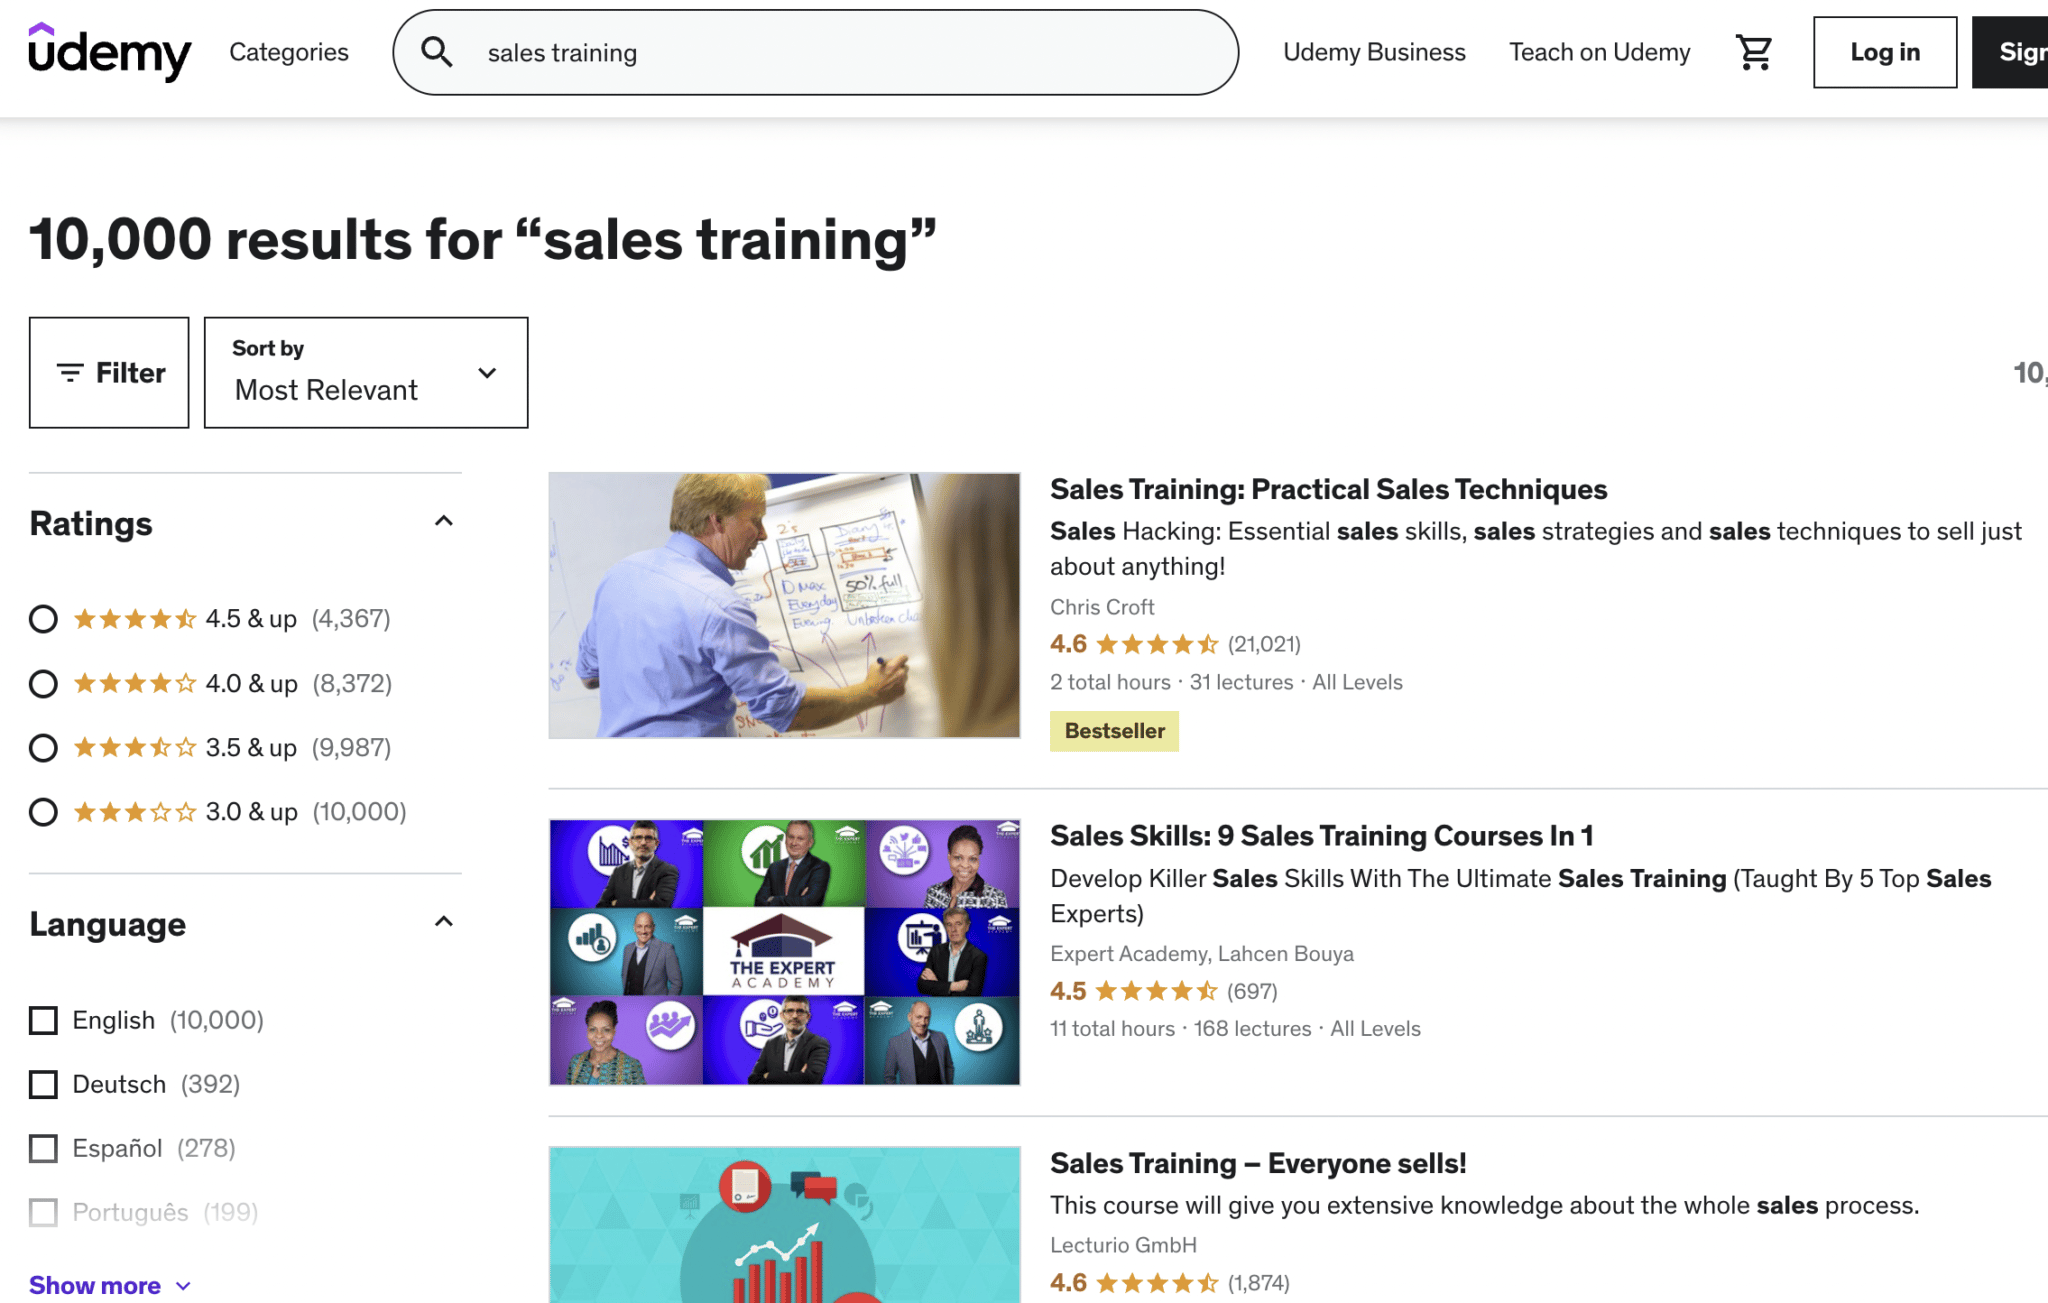 Udemy sales training courses